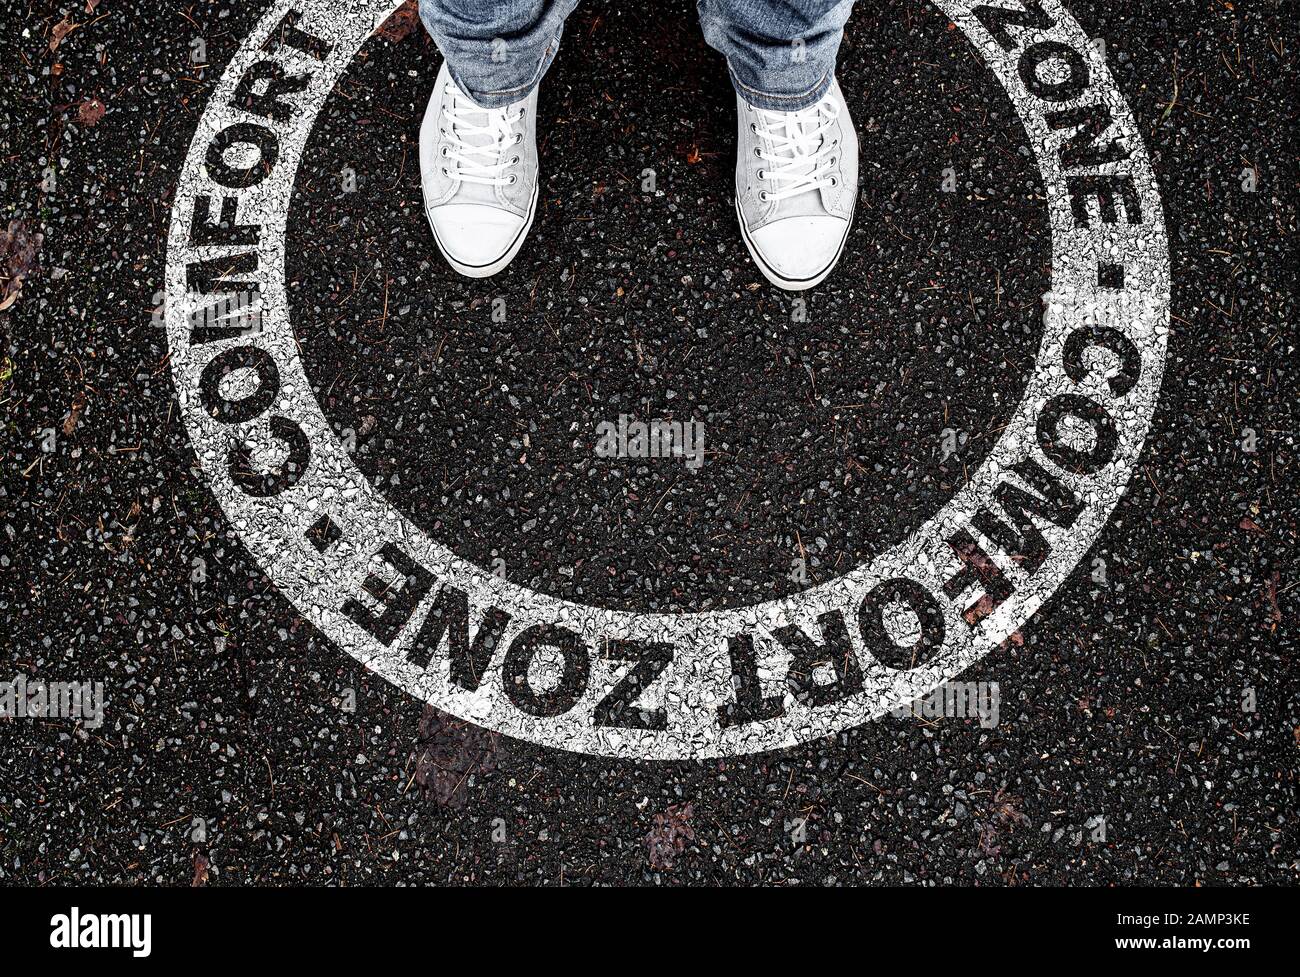 legs of person standing in circular marking on road with text COMFORT ZONE, being in or leaving own comfort zone concept Stock Photo